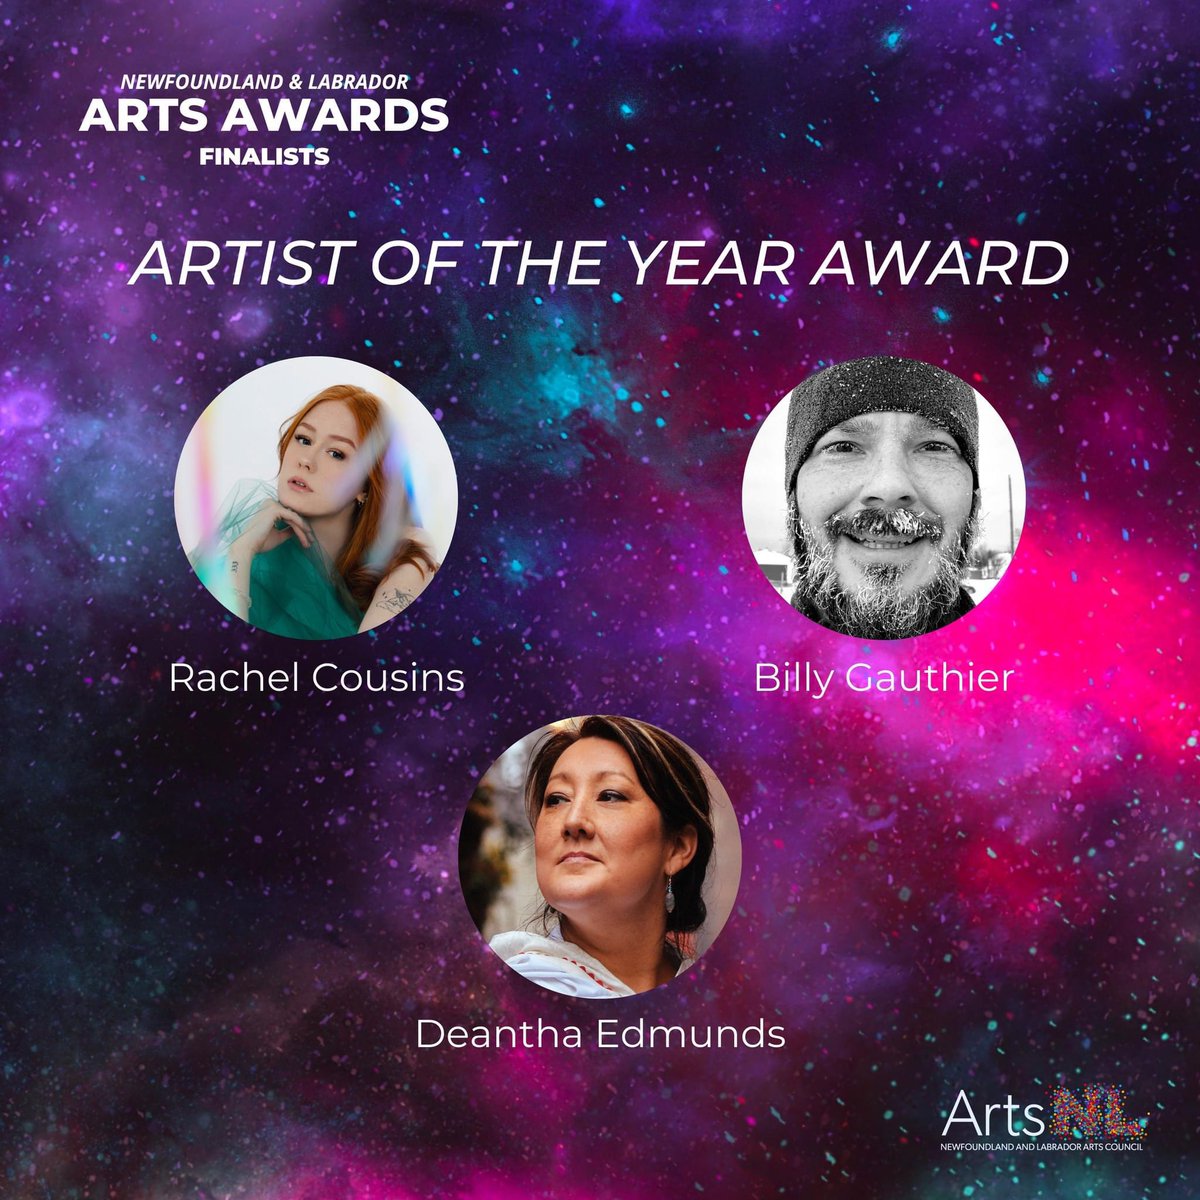 I am so honoured to be named a finalist for Artist of the Year. Thanks to @NLArtsCouncil for the consideration. Great company to be listed with.